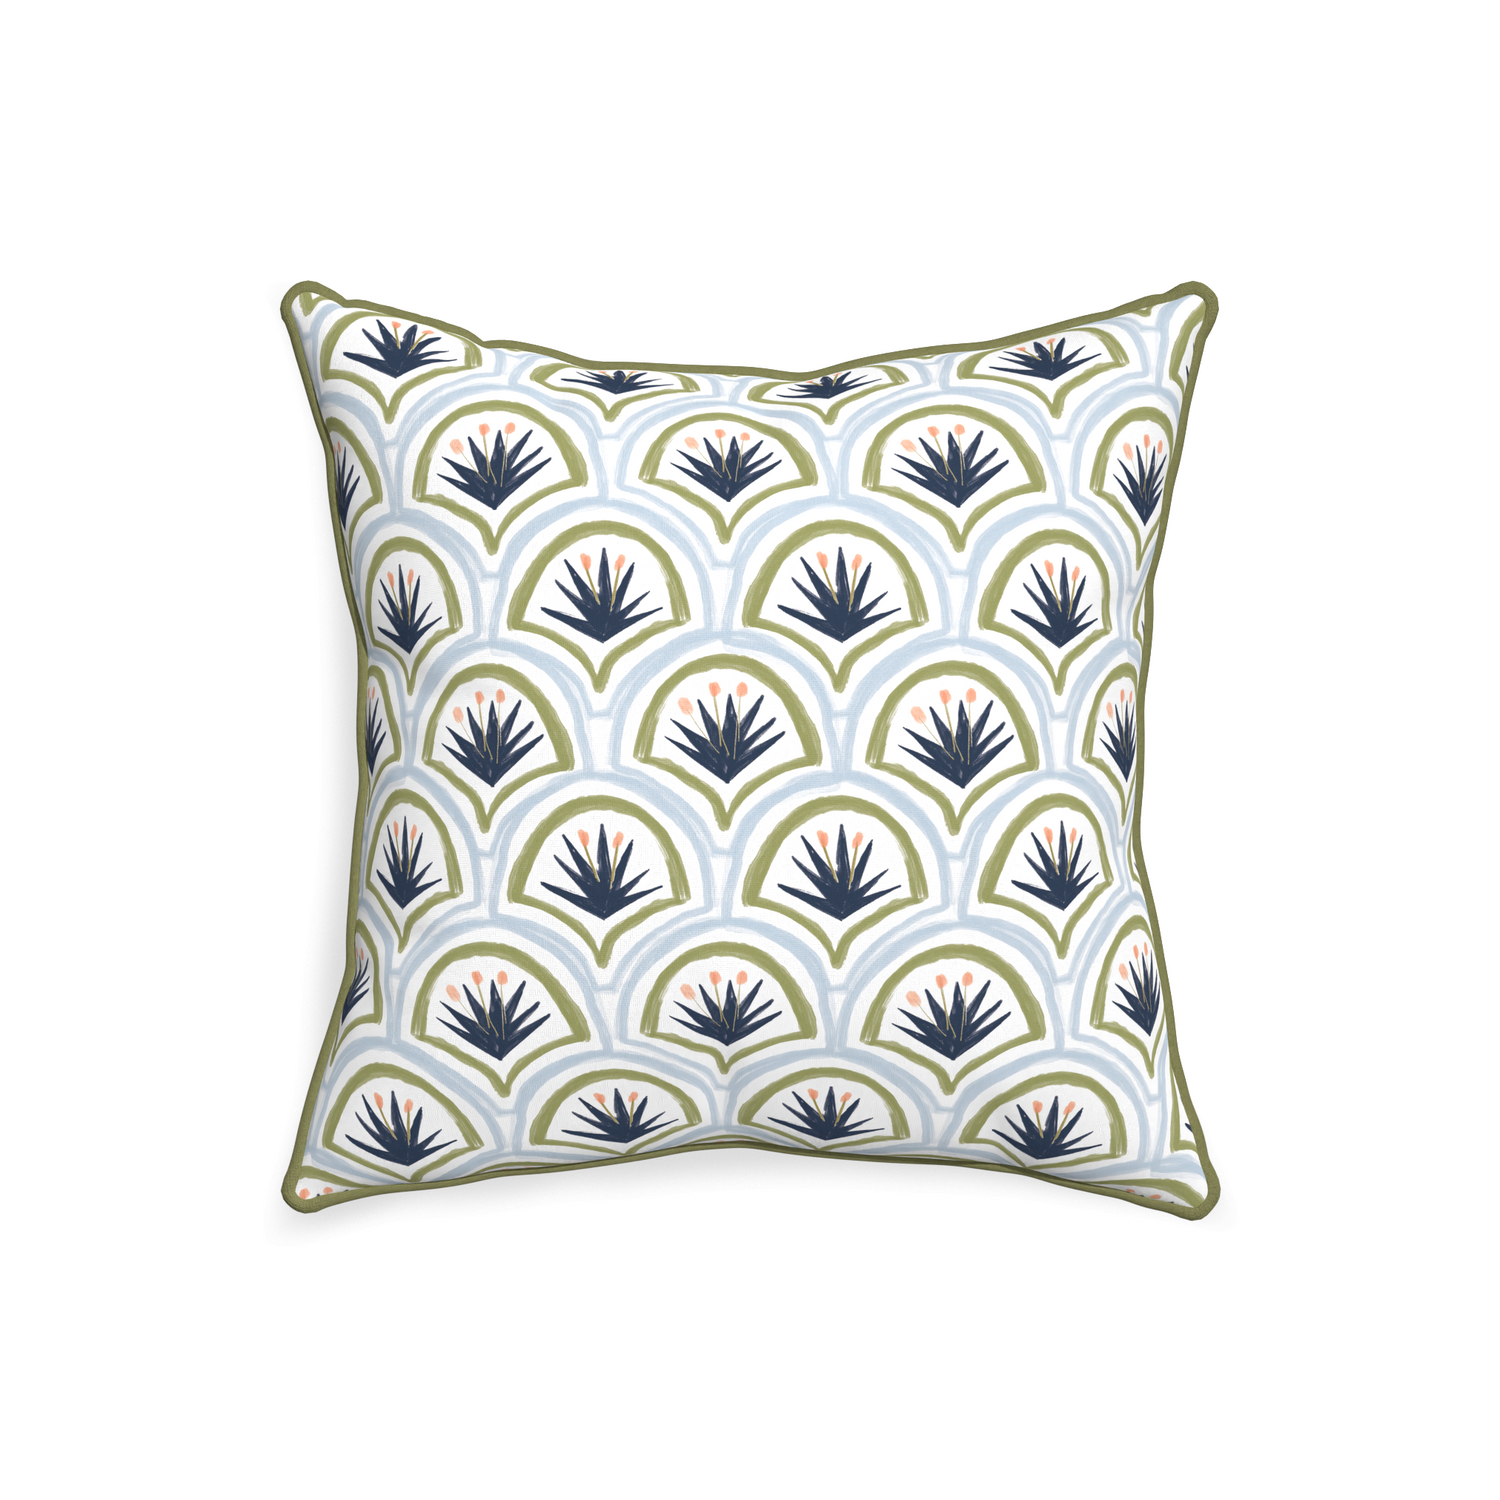 20-square thatcher midnight custom art deco palm patternpillow with moss piping on white background